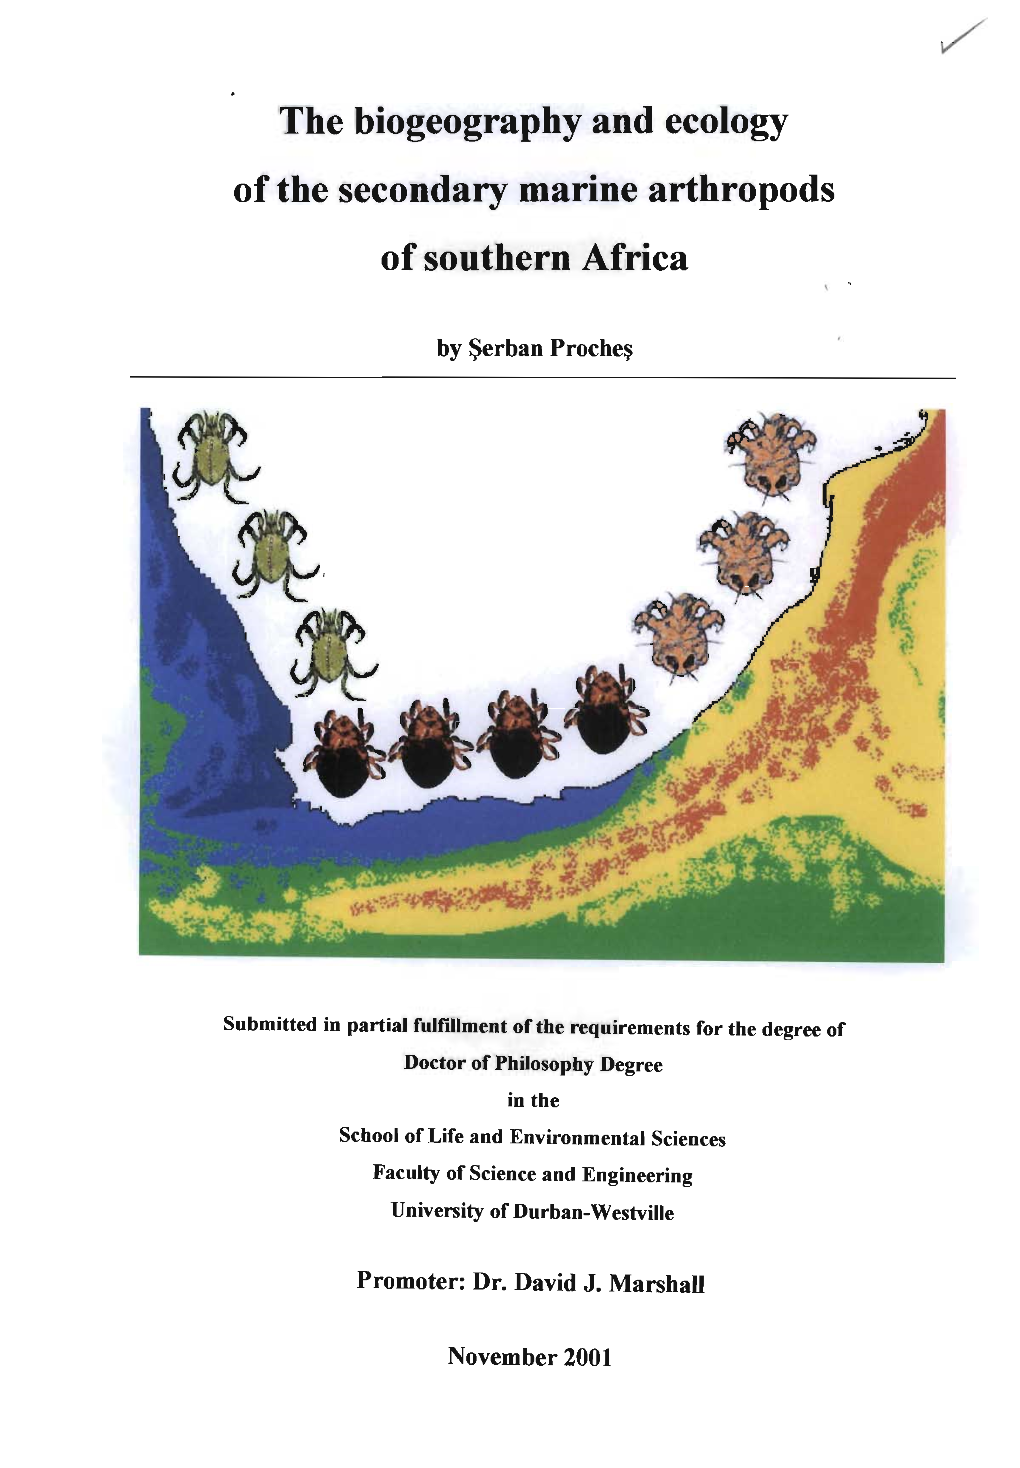 The Biogeography and Ecology of the Secondary Marine Arthropods of Southern Africa \